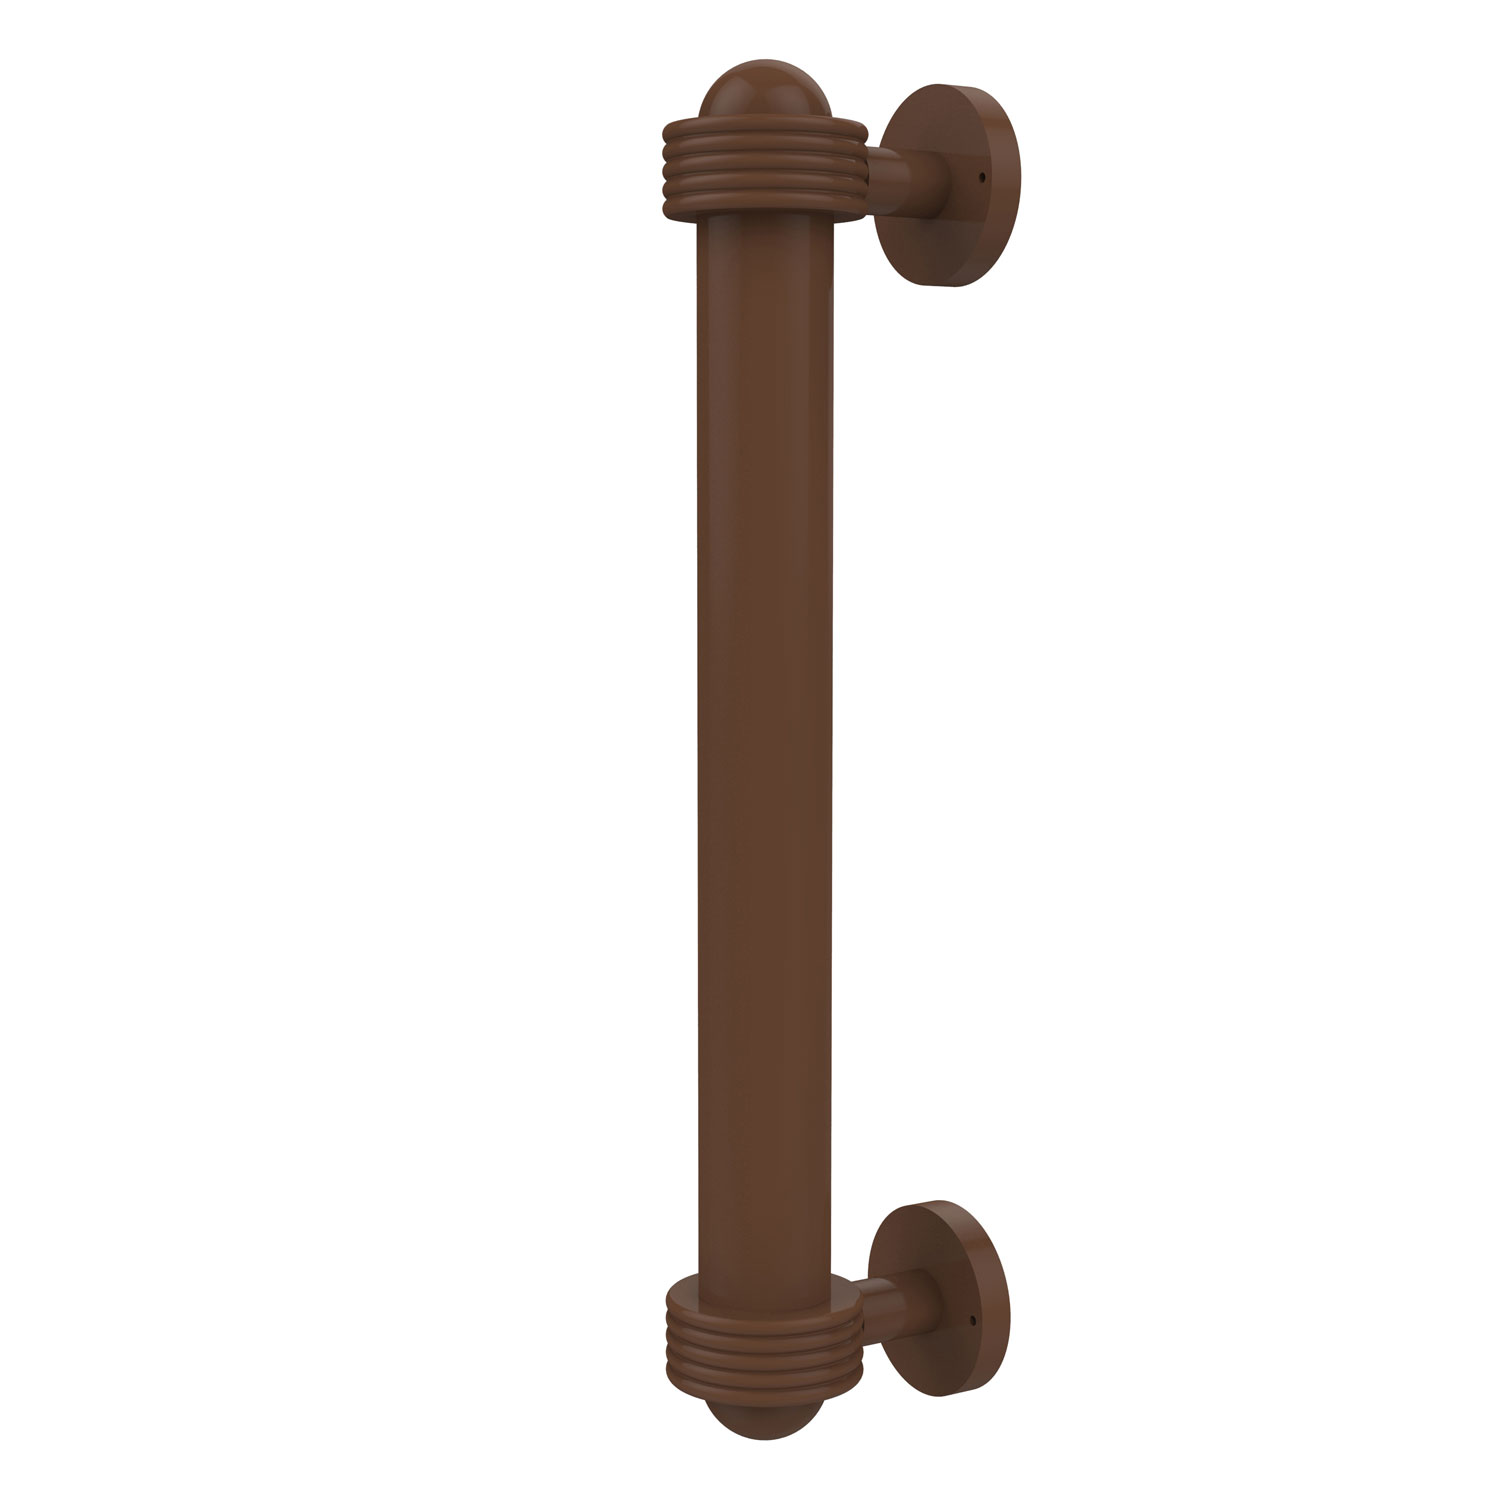 Cabinet Hardware & Knobs Category